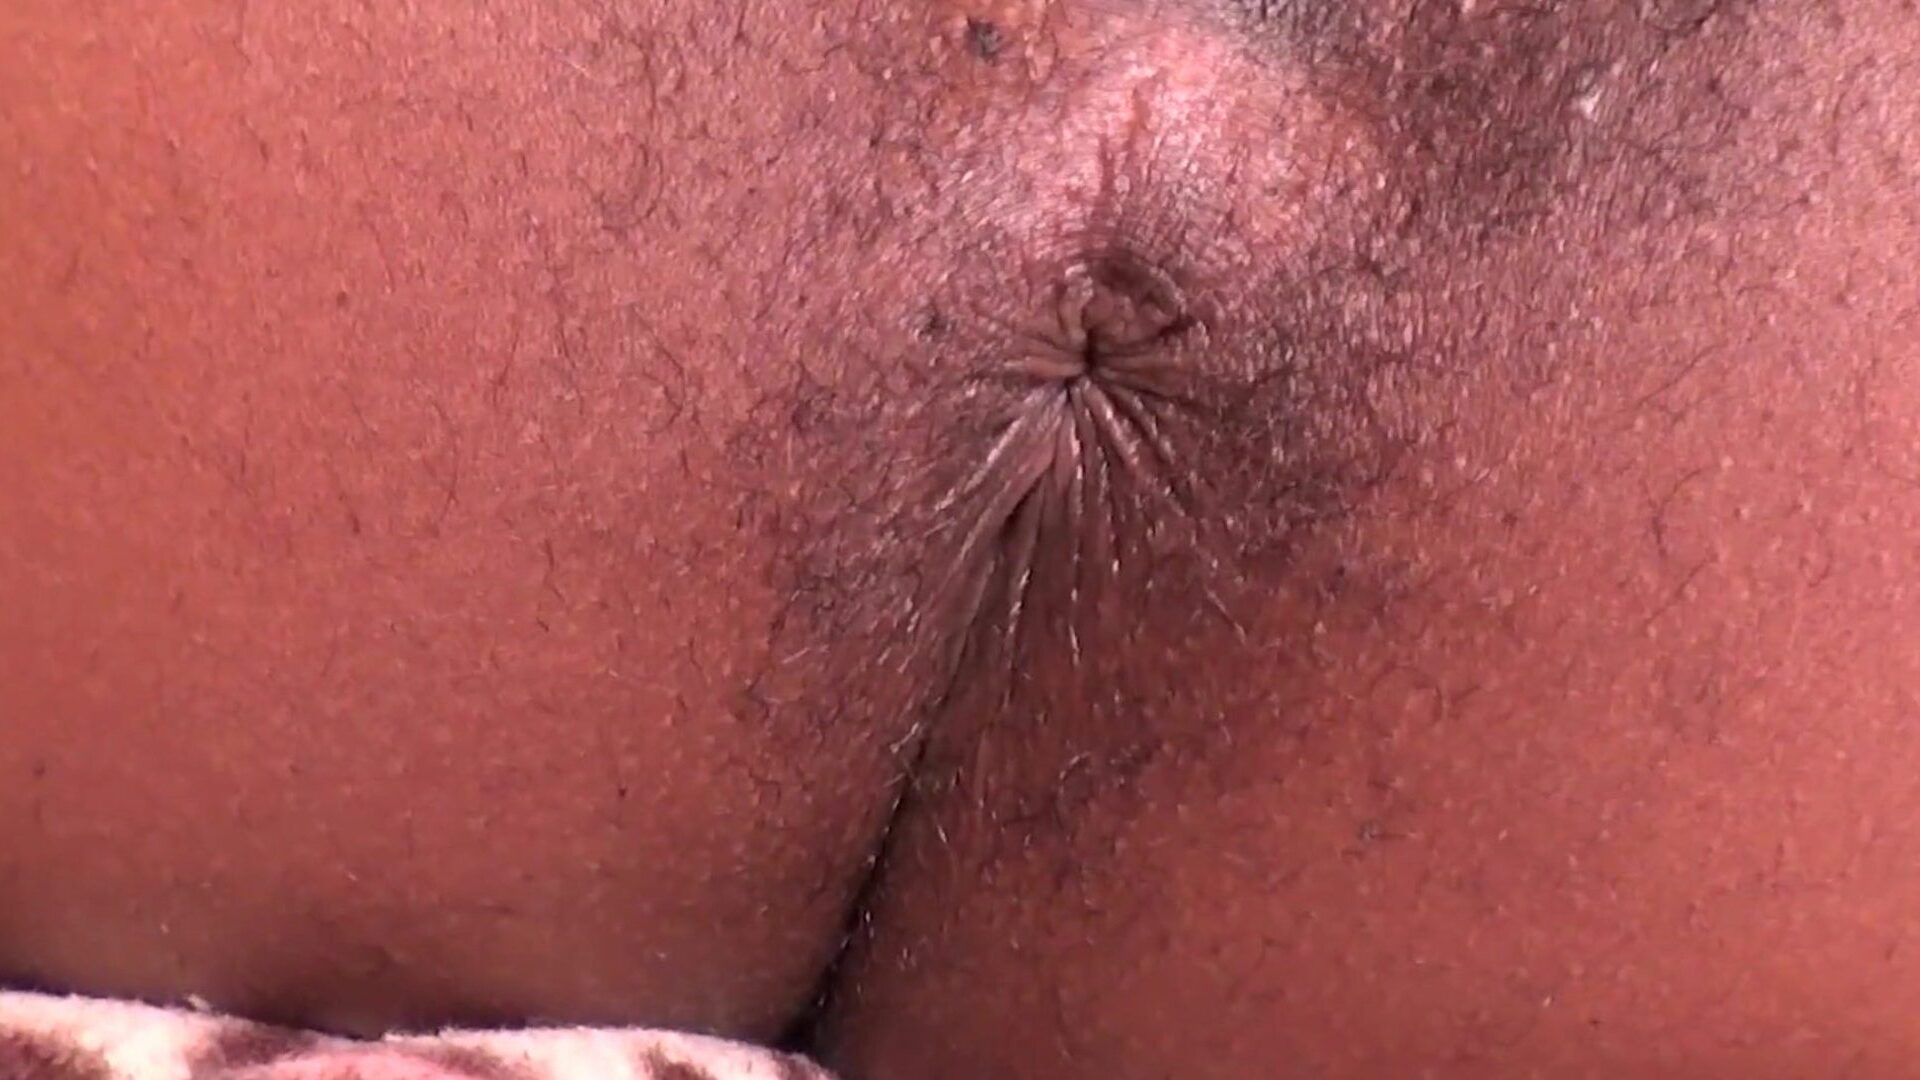 Close Up Fat Hairy Asshole Black Butt Hole Wink, Sheisnovember Spread Eagle Vagina With Thick Thighs And Legs Apart Aug 13th 2021